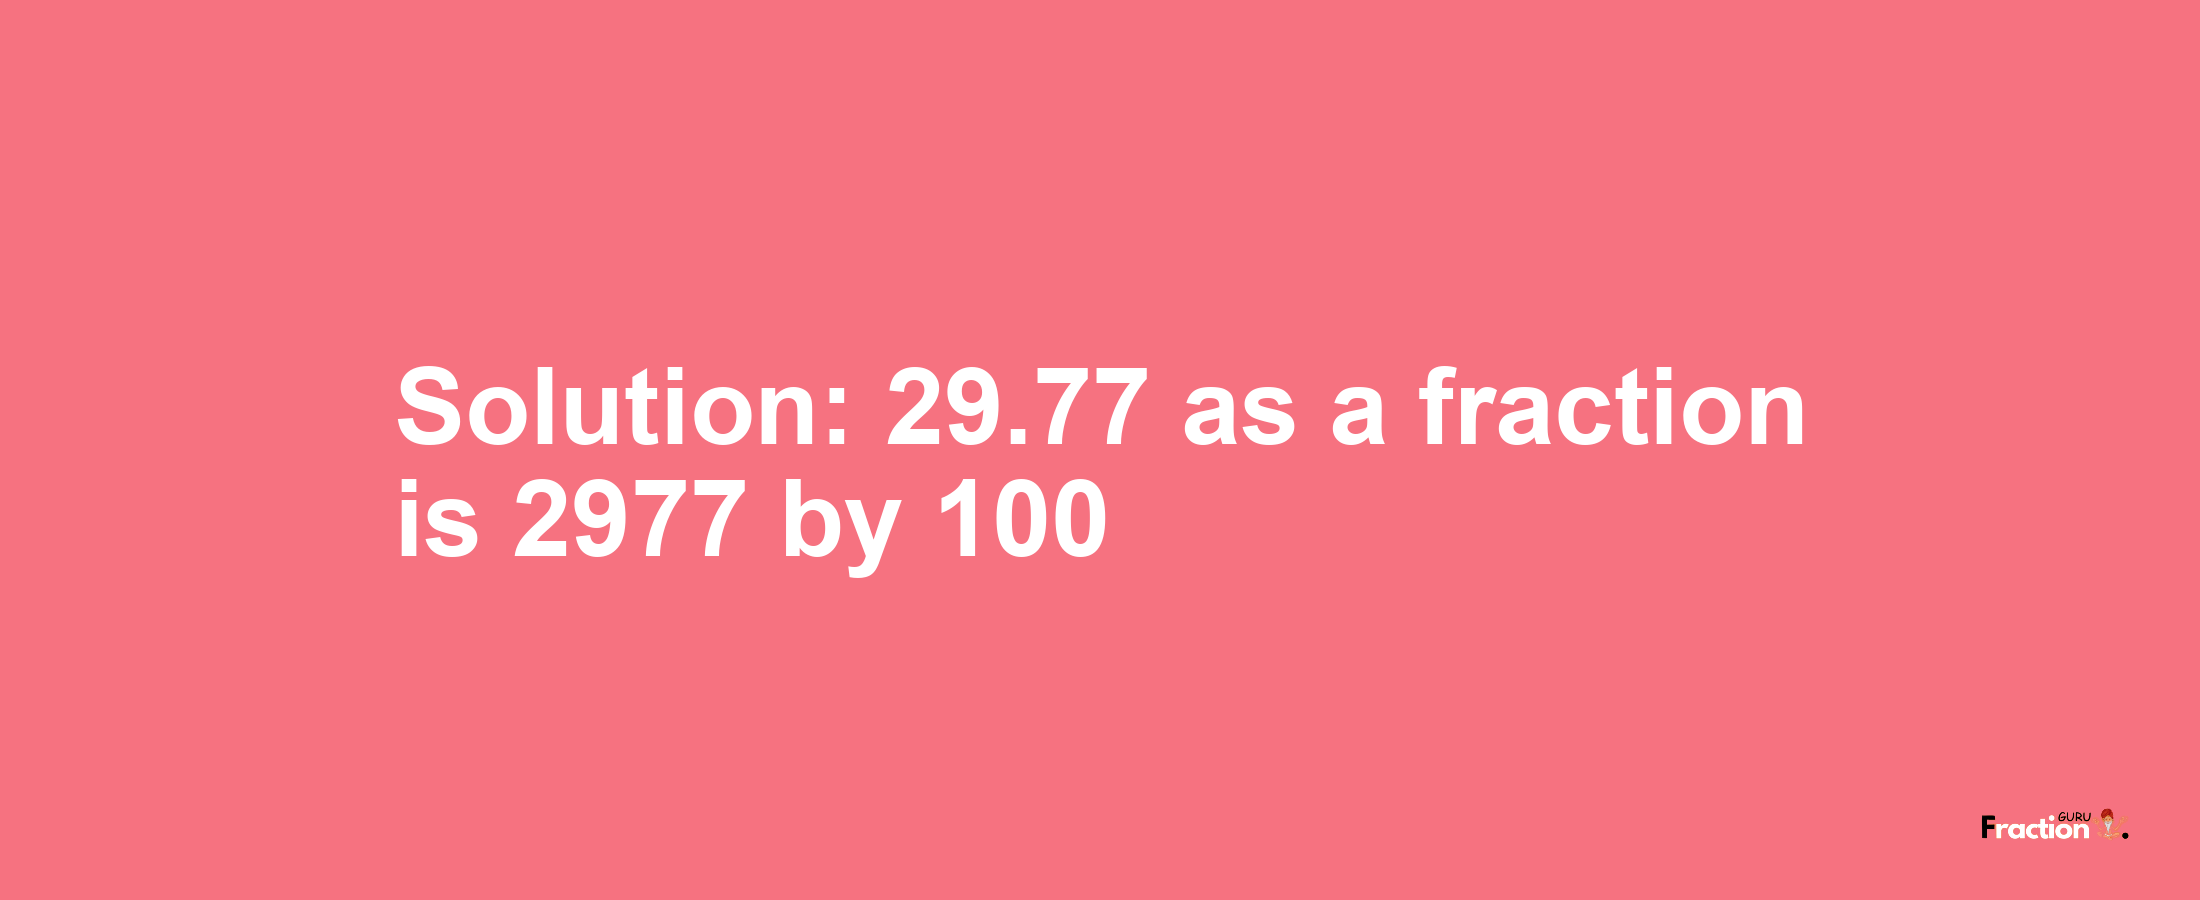 Solution:29.77 as a fraction is 2977/100